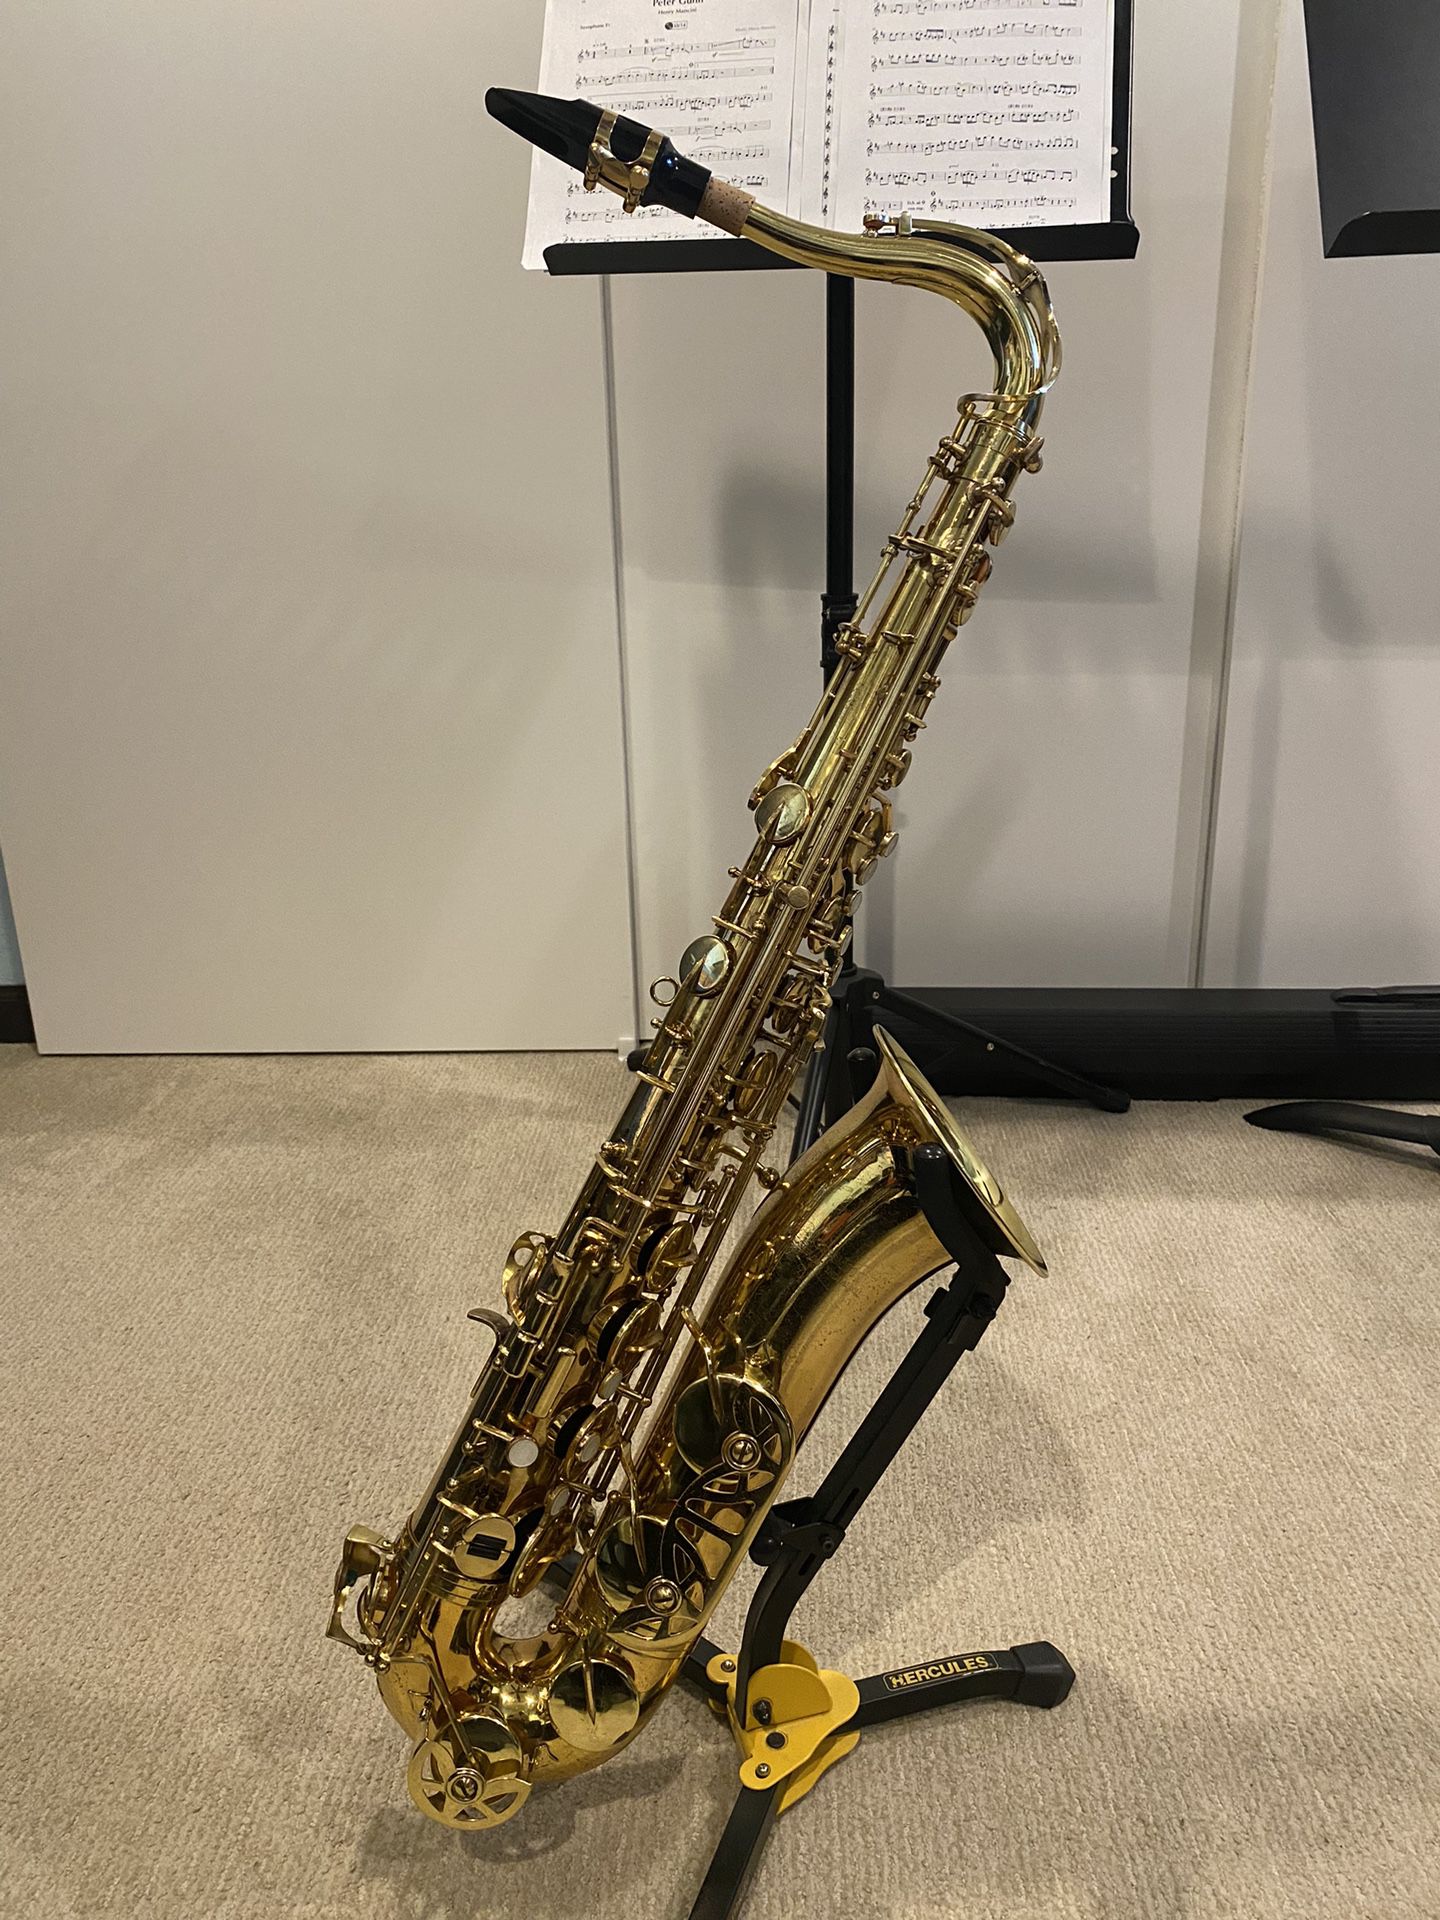 Tenor Saxophone Blessing, Just Serviced